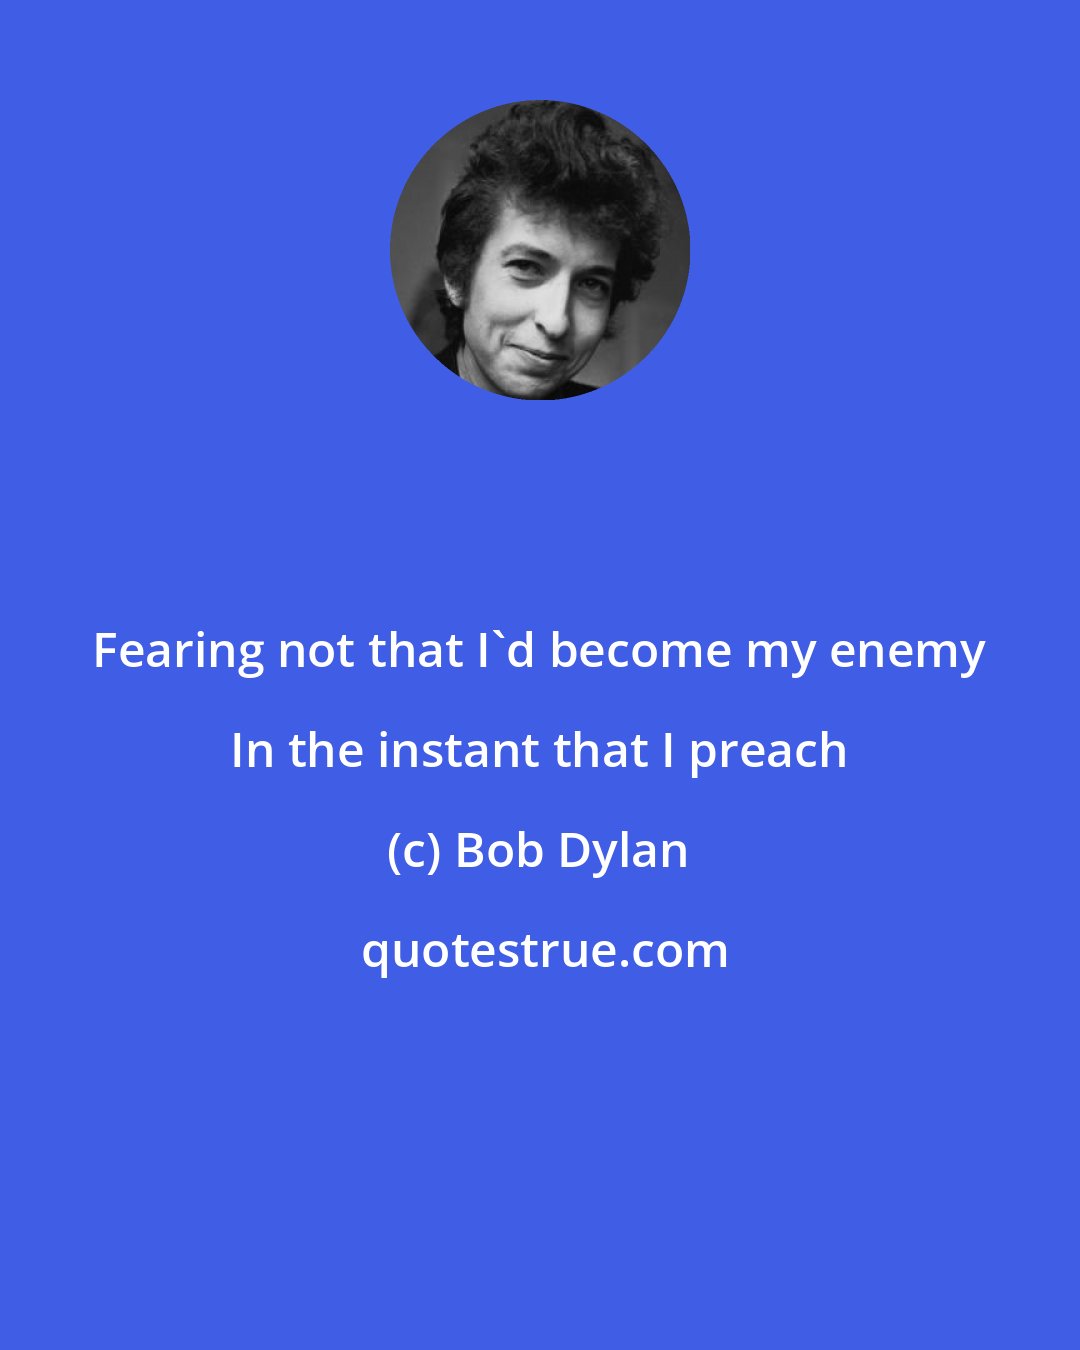 Bob Dylan: Fearing not that I'd become my enemy In the instant that I preach